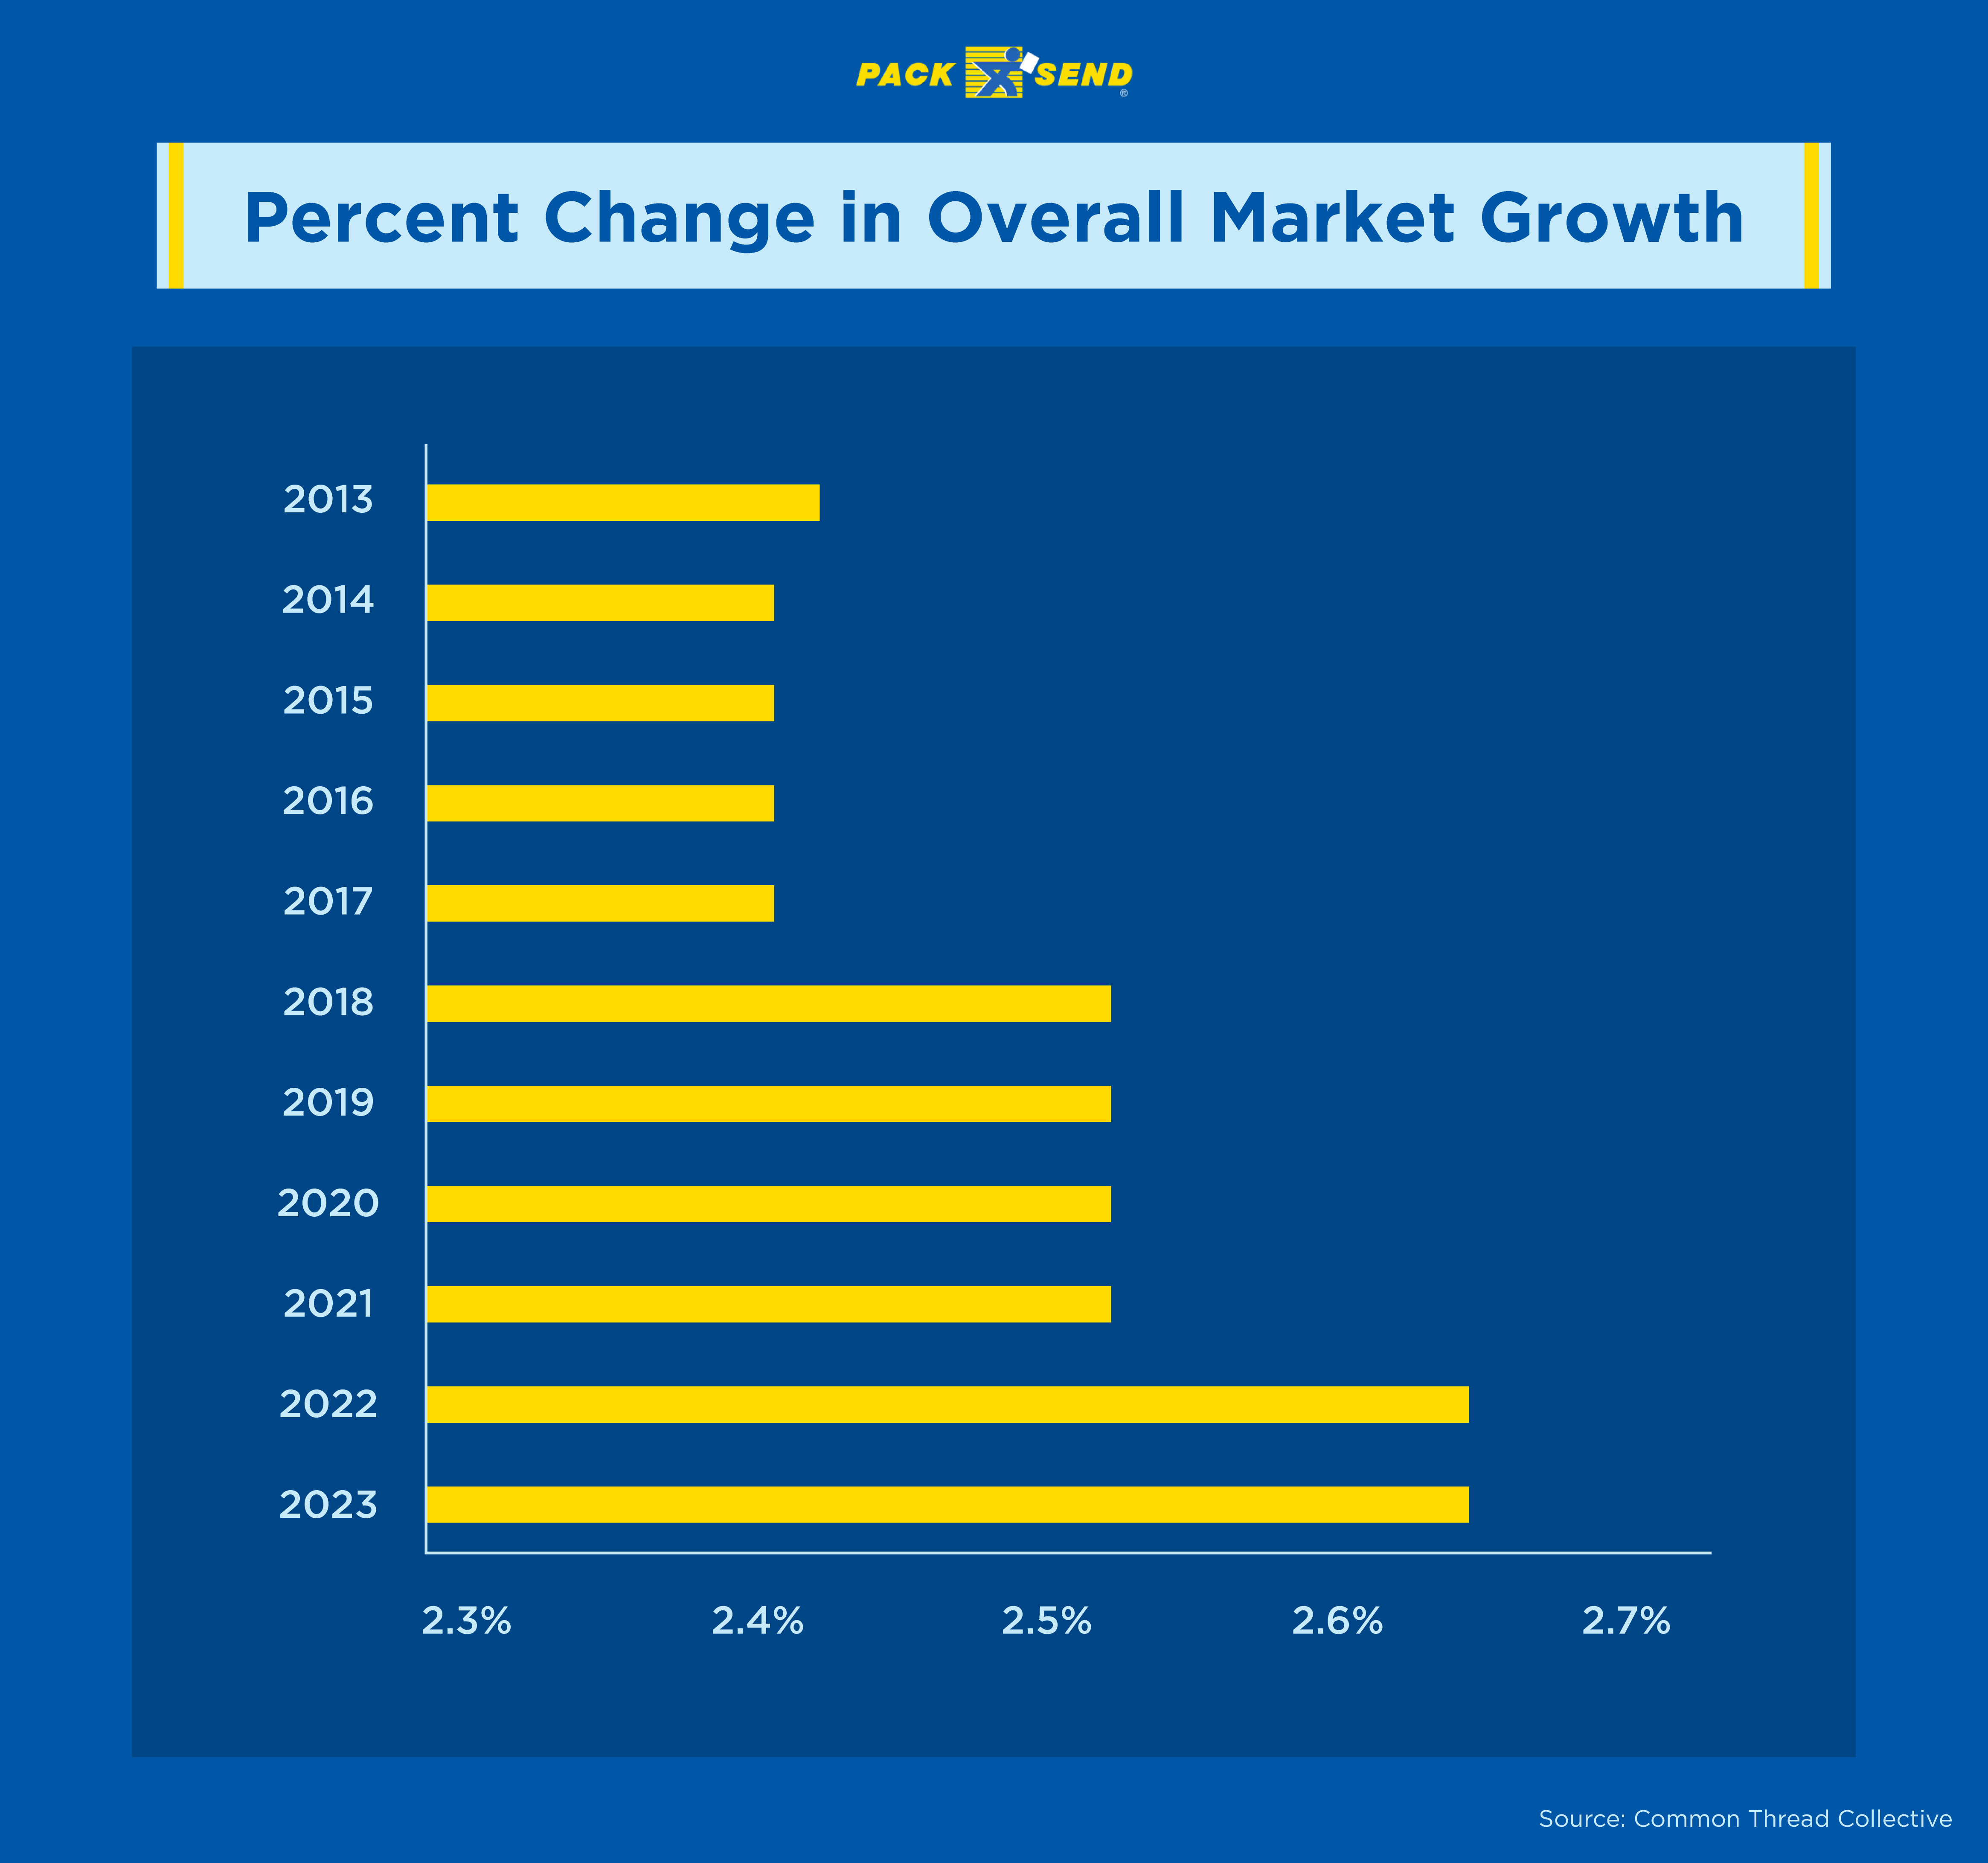 Percent change in overall market growth of beauty and personal care industry